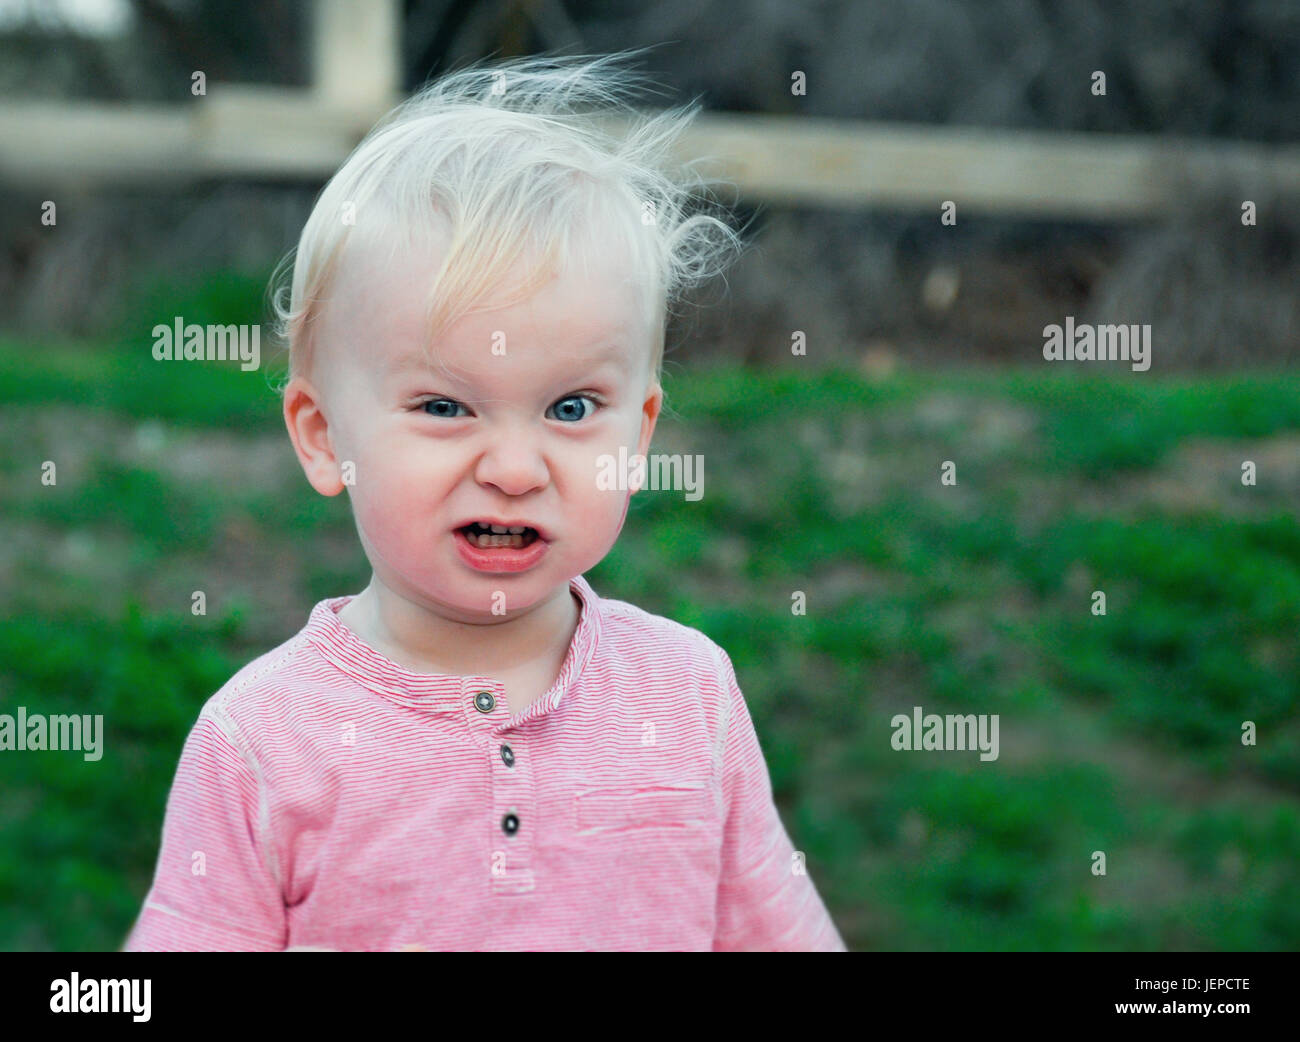 Little boy making funny face Stock Photo